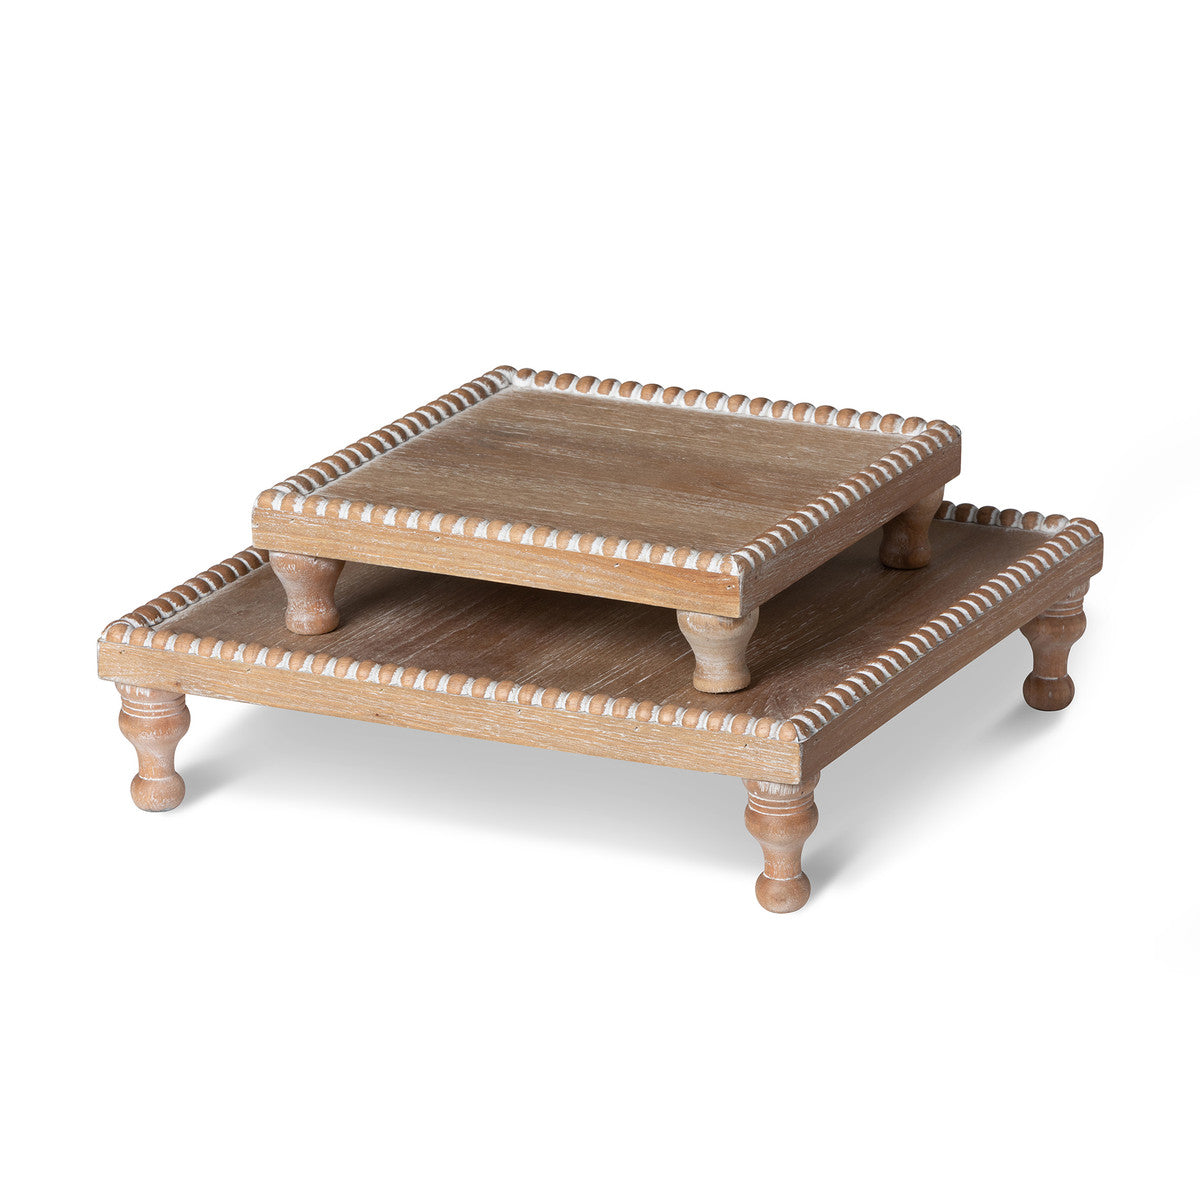 Wood Beaded Square Serving Tray - Set of 2